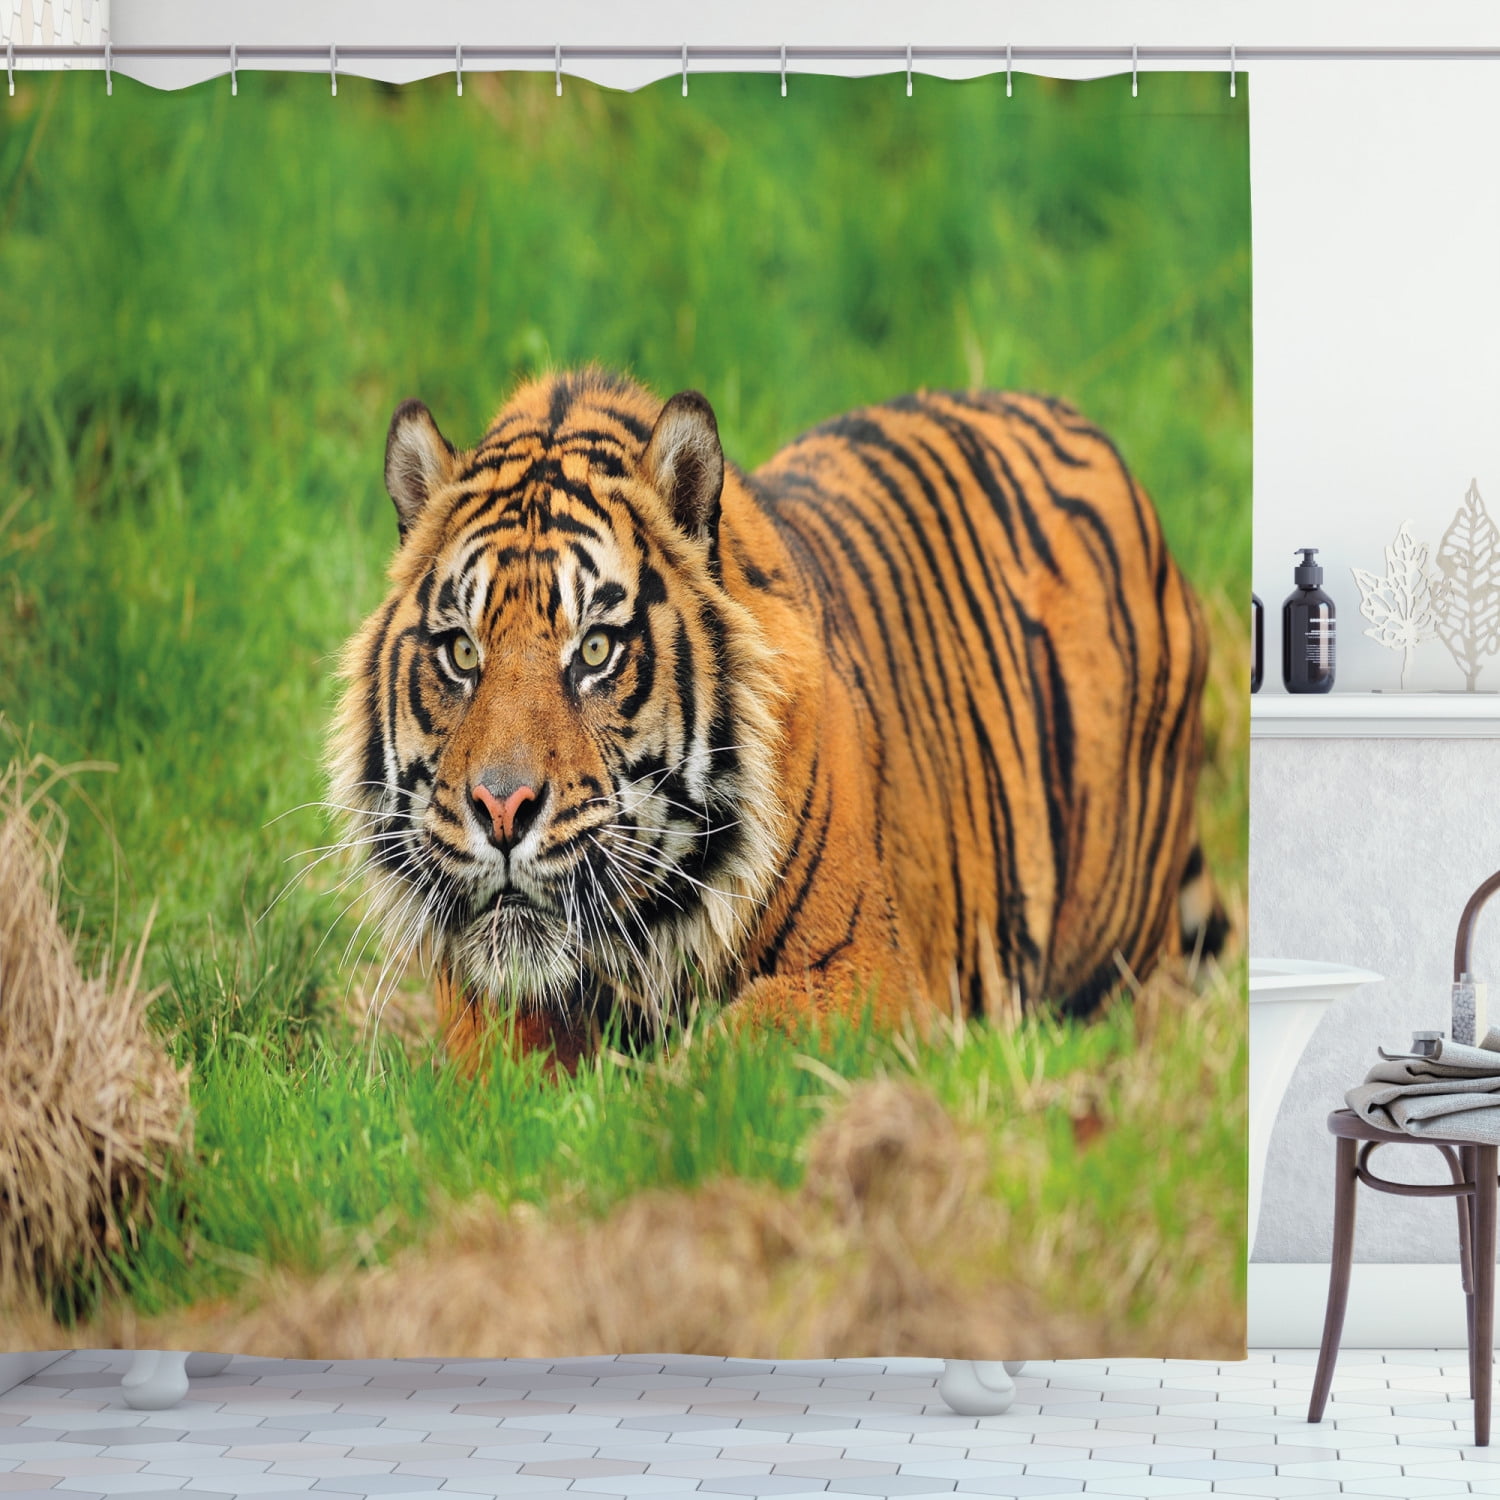 Outdoor Curtain for Patio Waterproof W72 x L96 Inch Green Orange Sumatran Feline Hiding in Ambush While Stalking Its Prey Moments Before Attack leinuoyi Tiger Outdoor Curtain Kit